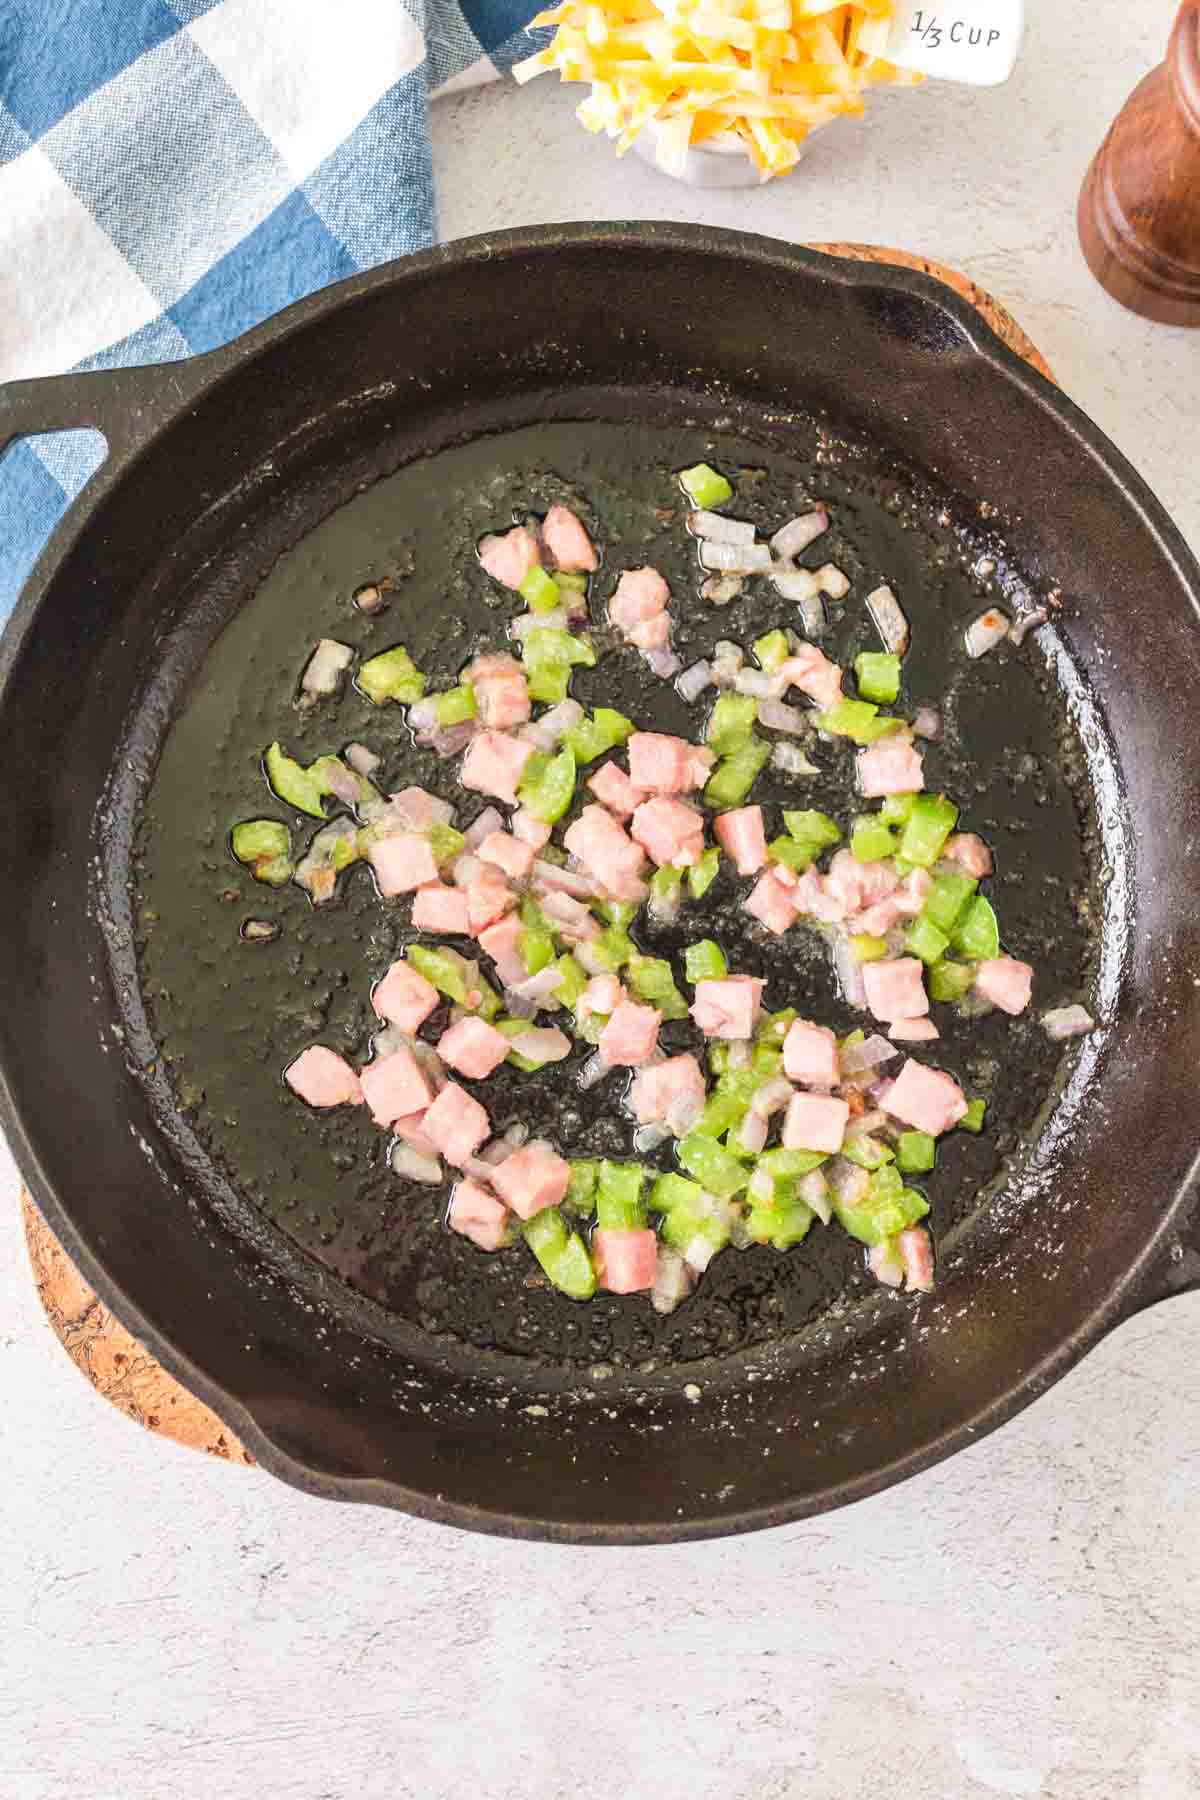 raw ingredients for a omelet being cooked on the cast iron.